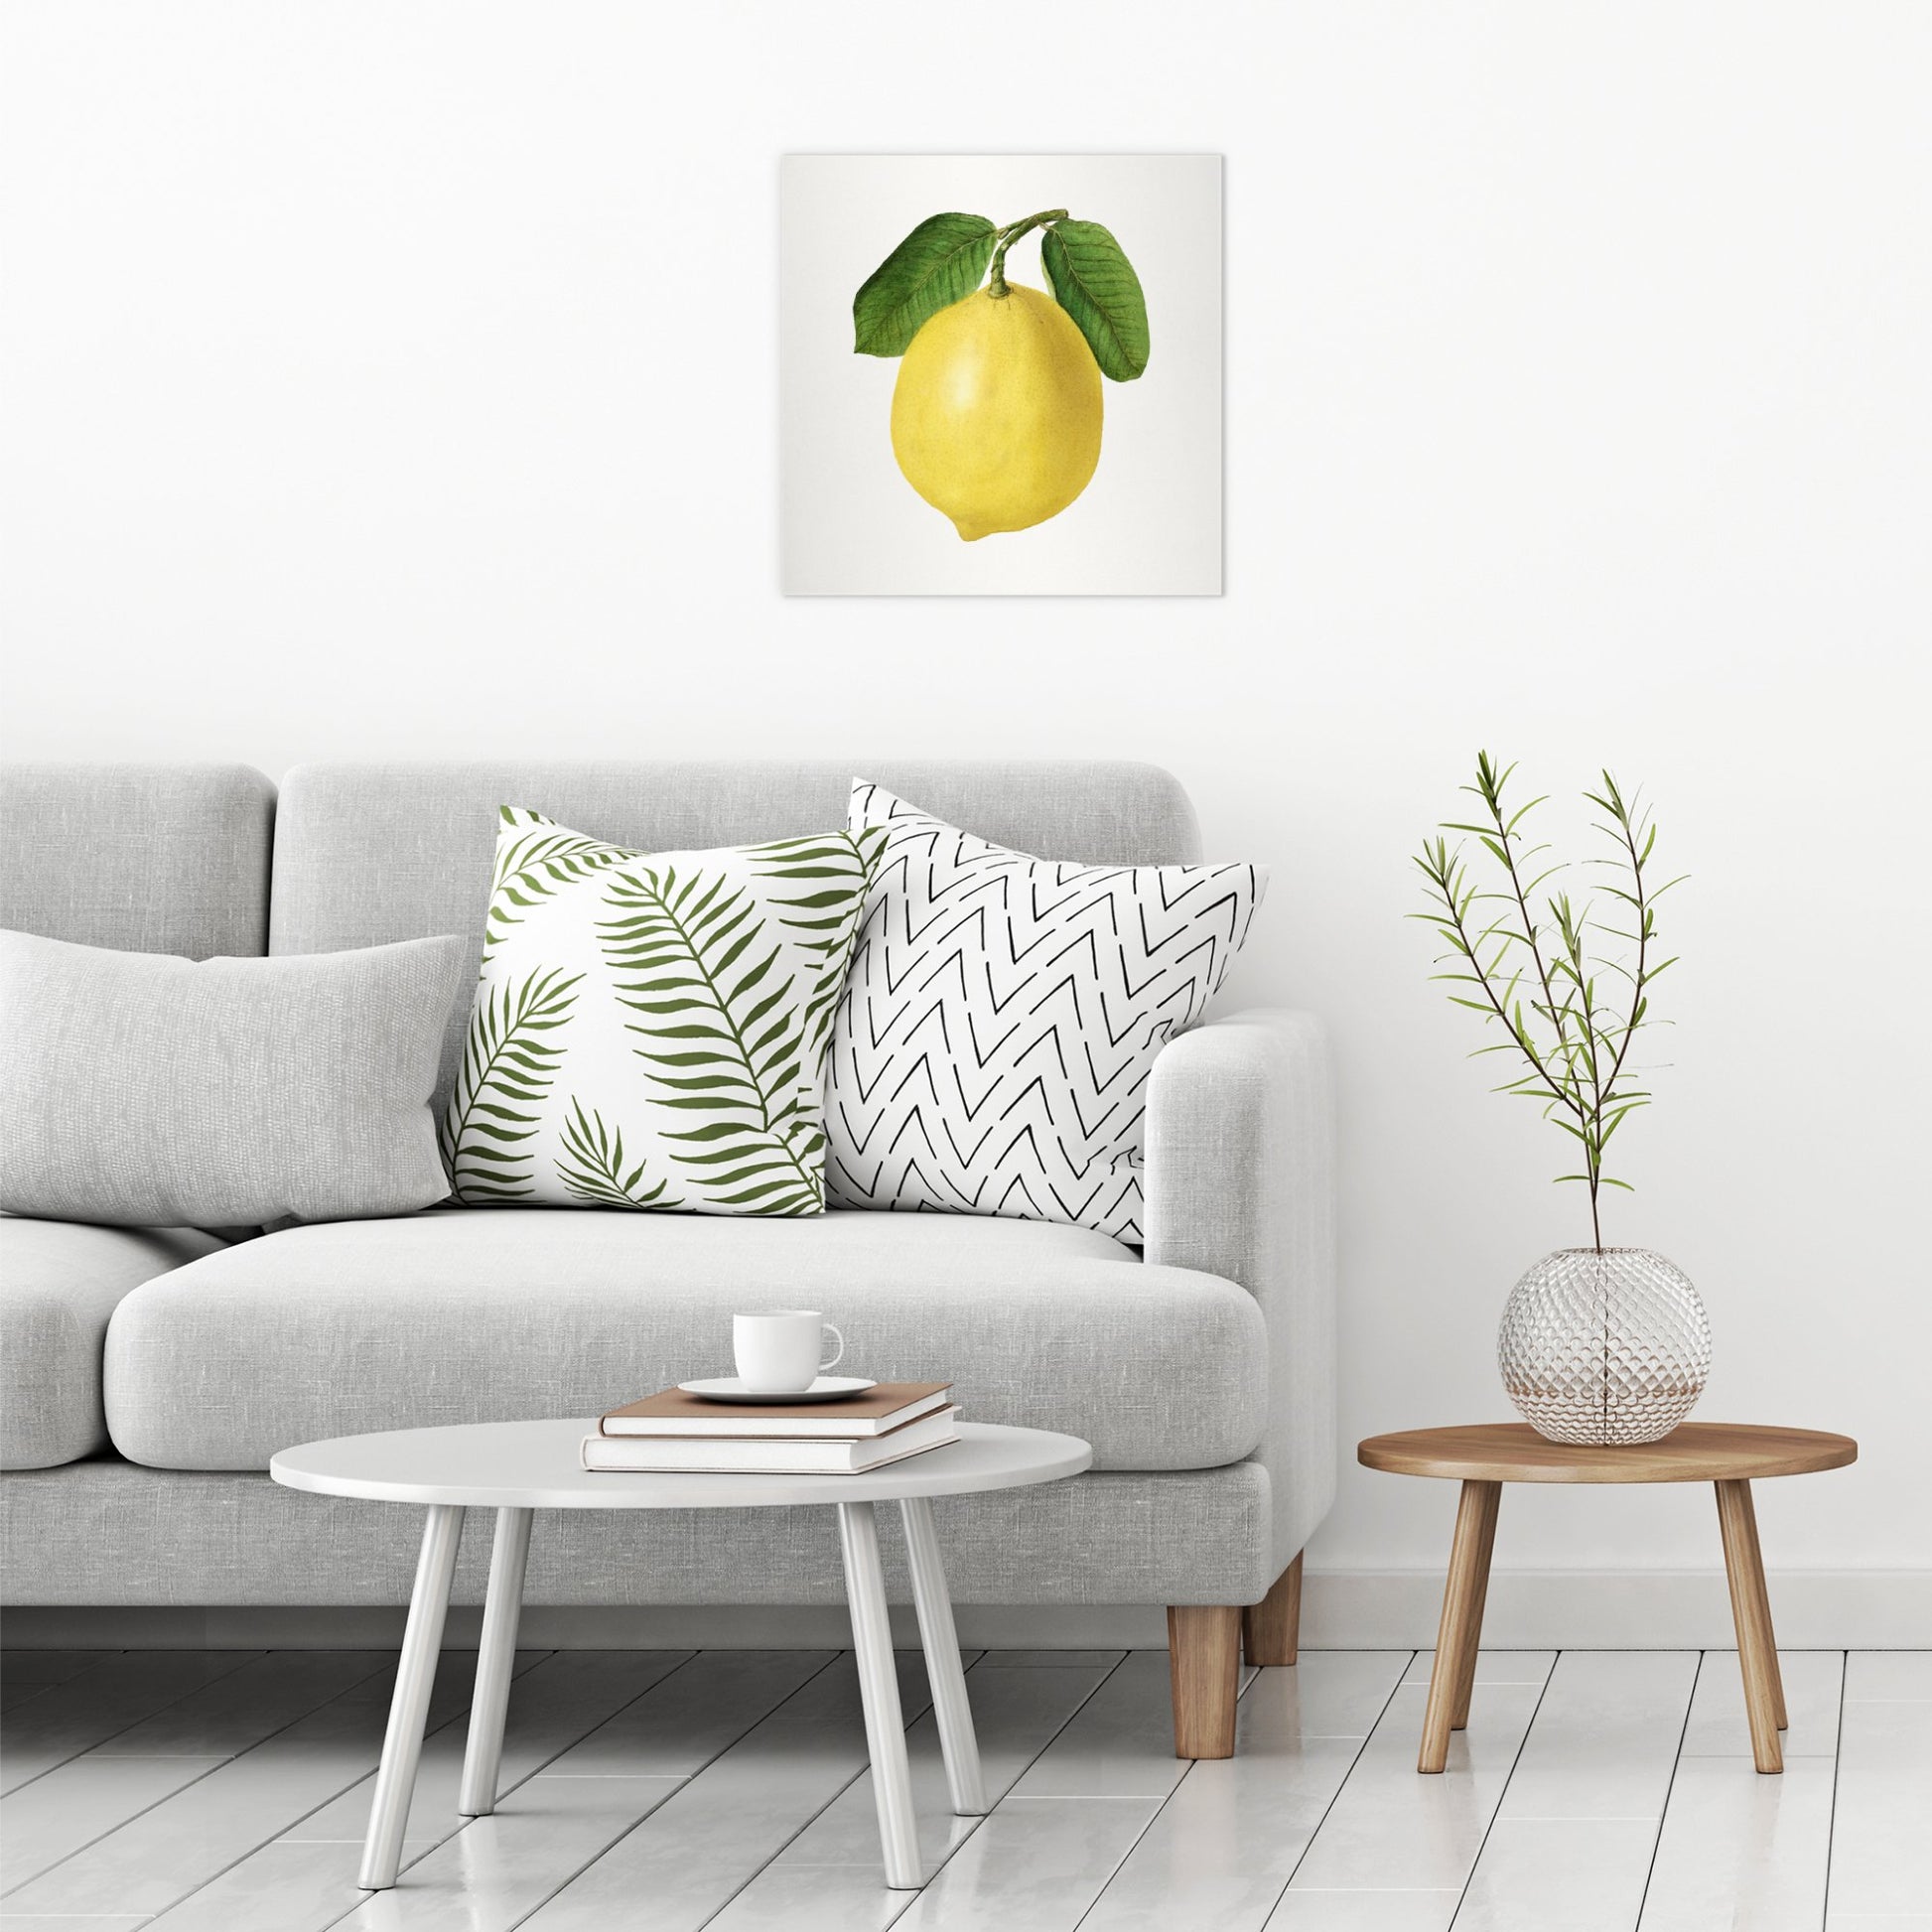 A contemporary modern room view showing a large size metal art poster display plate with printed design of a Vintage Lemon Illustration by Ellen Isham Schutt (1910)